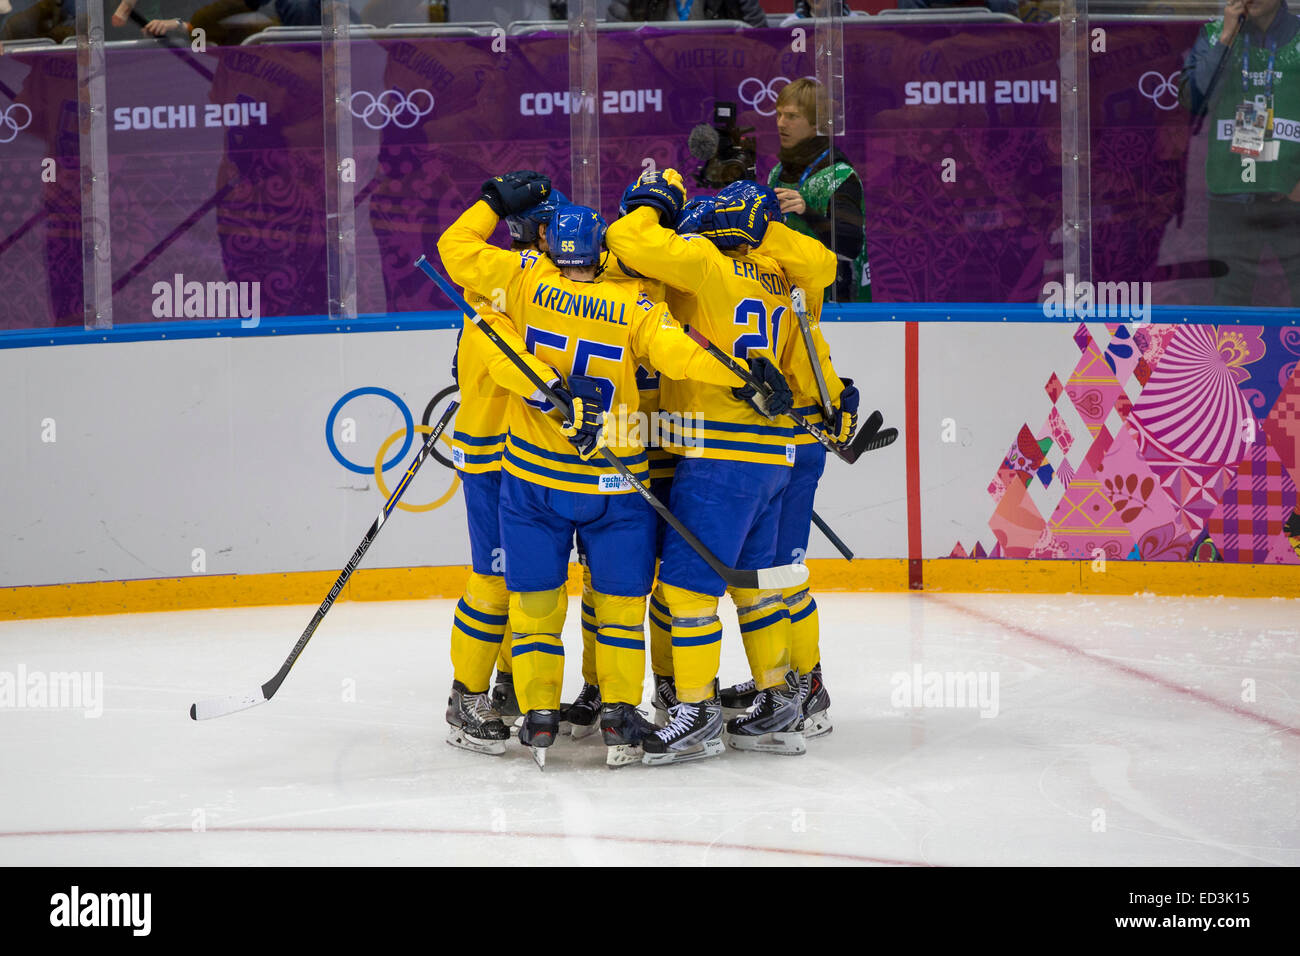 Team Sweden celebrates during Sweden vs Slovenia game at the Olympic Winter Games, Sochi 2014 Stock Photo